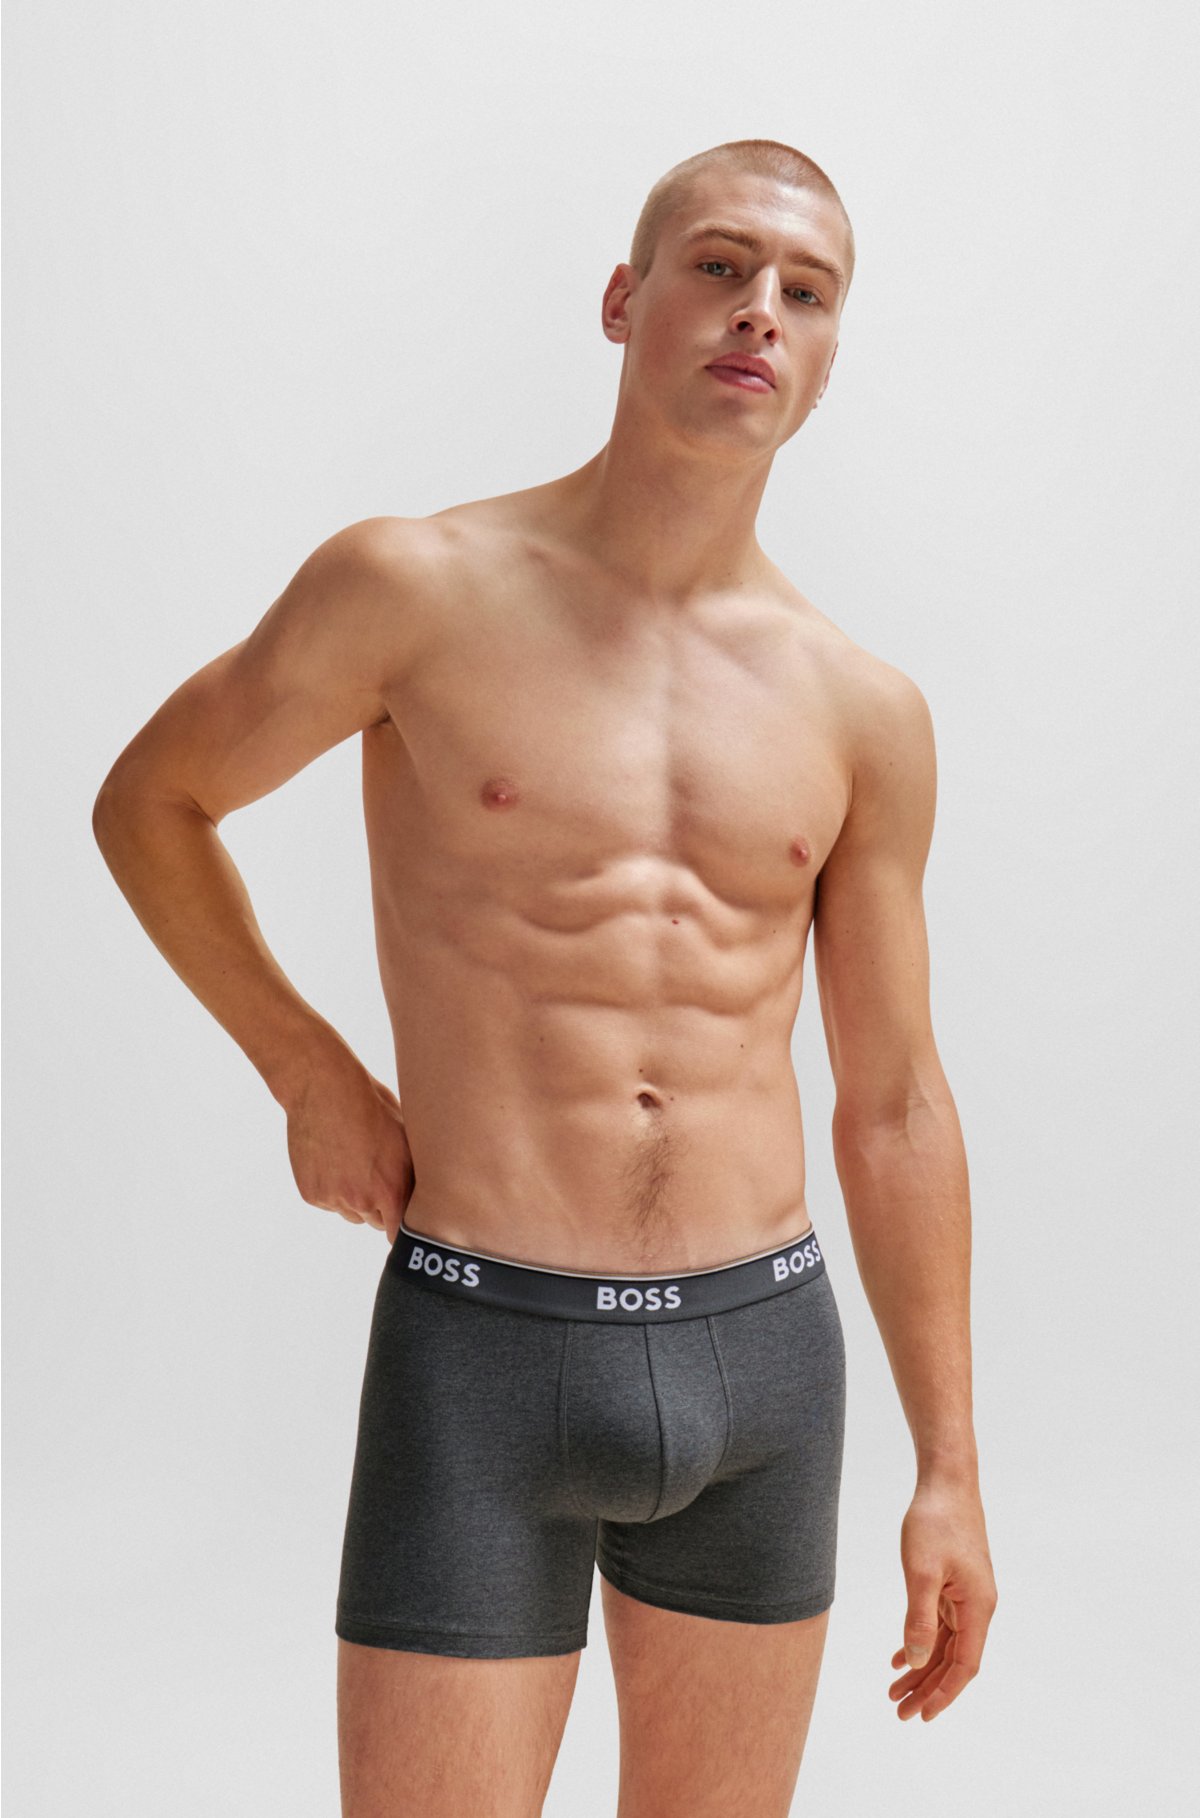 BOSS - Three-pack of microfibre boxer briefs with logo waistbands